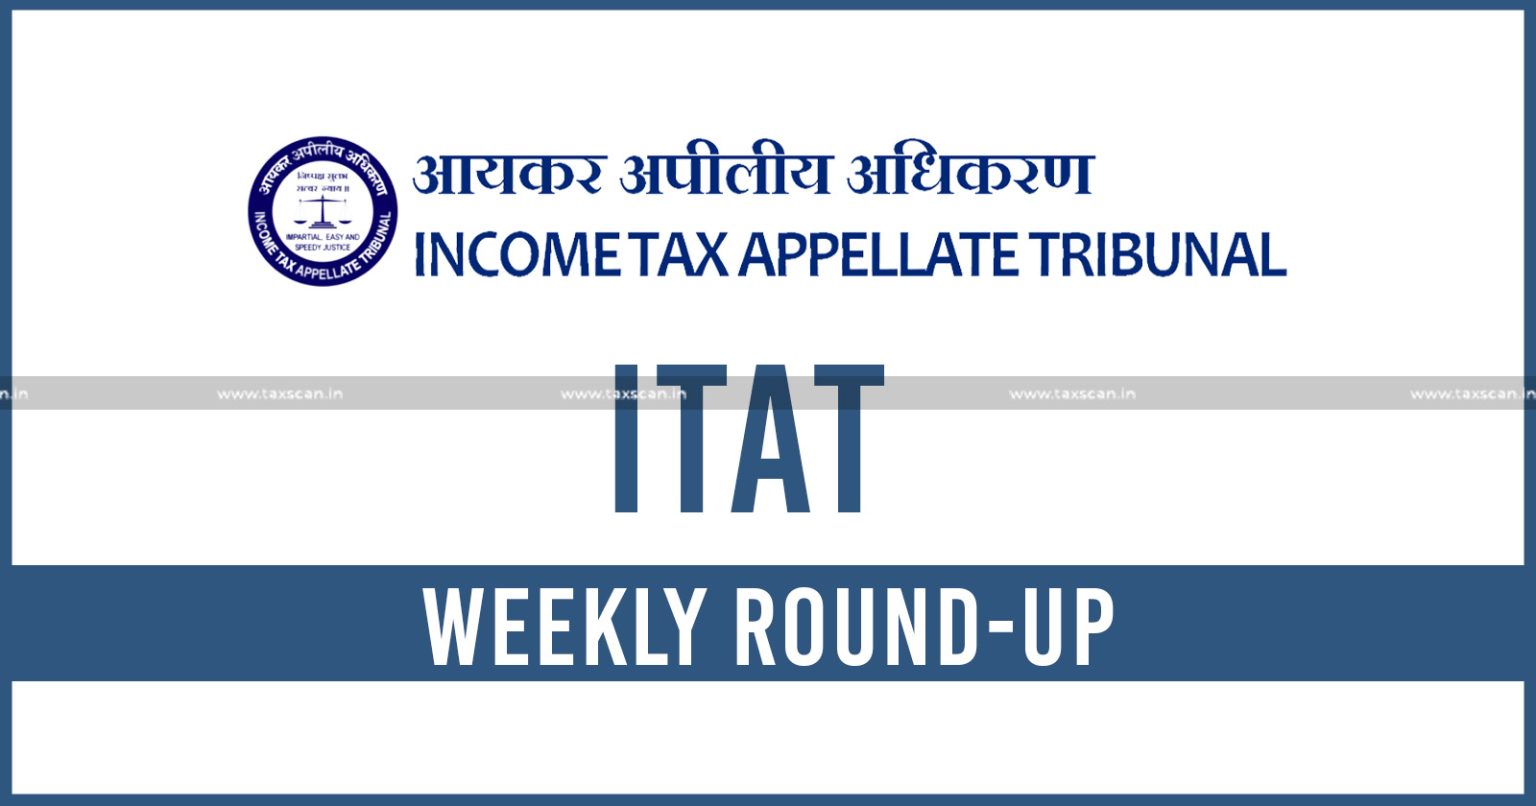 ITAT Weekly Round-up - analytically - summarizes - key stories - Income Tax act - taxscan